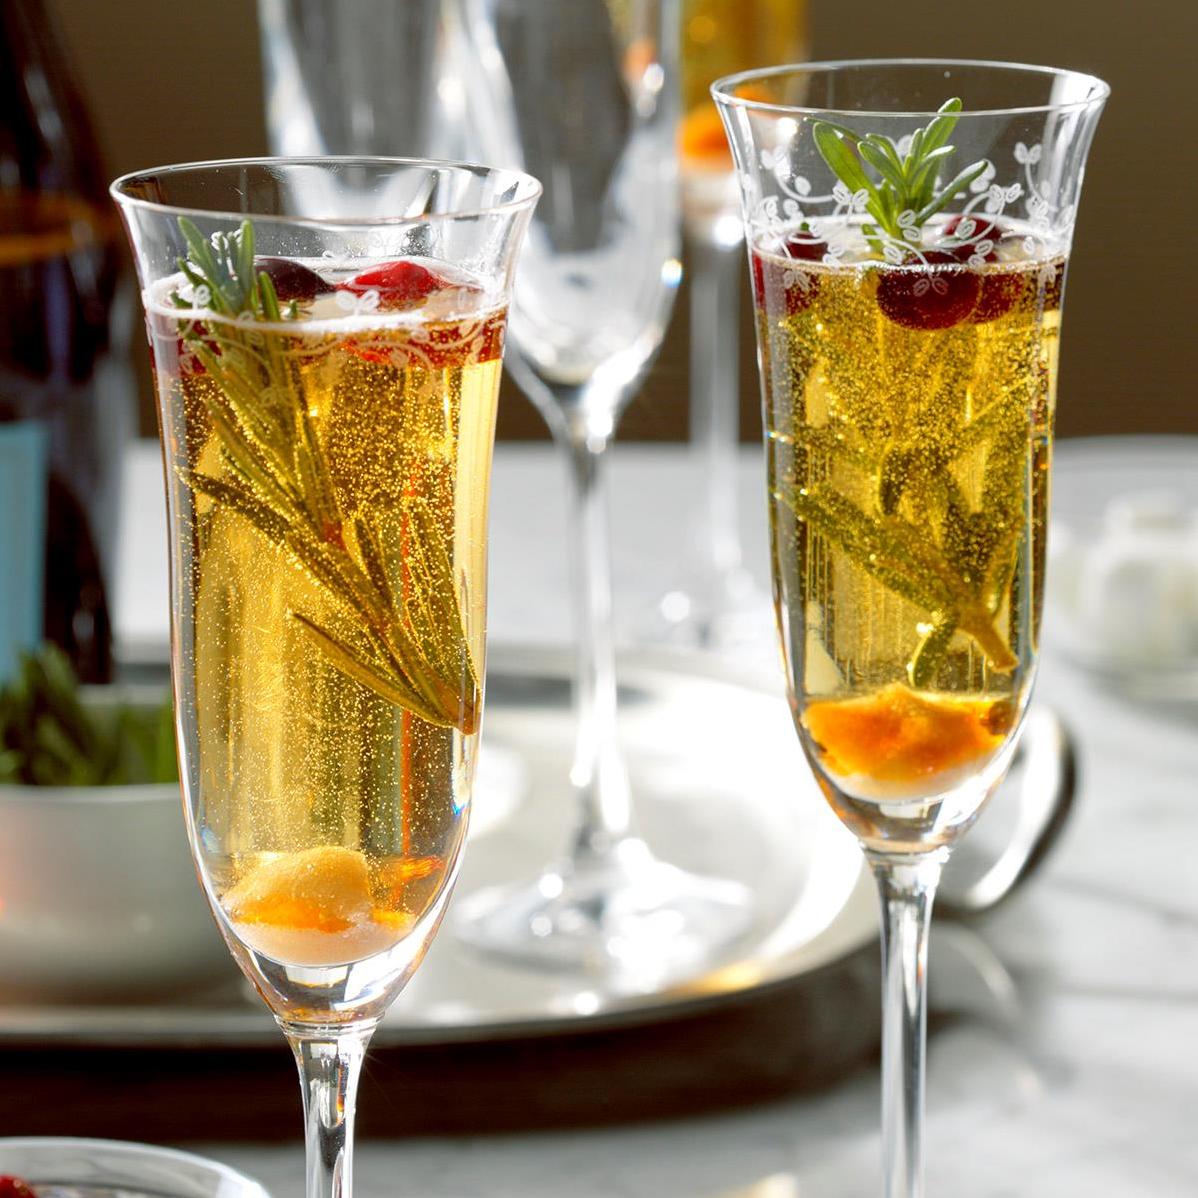  Sipping on a champagne martini feels like being wrapped in a luxurious bubble bath.